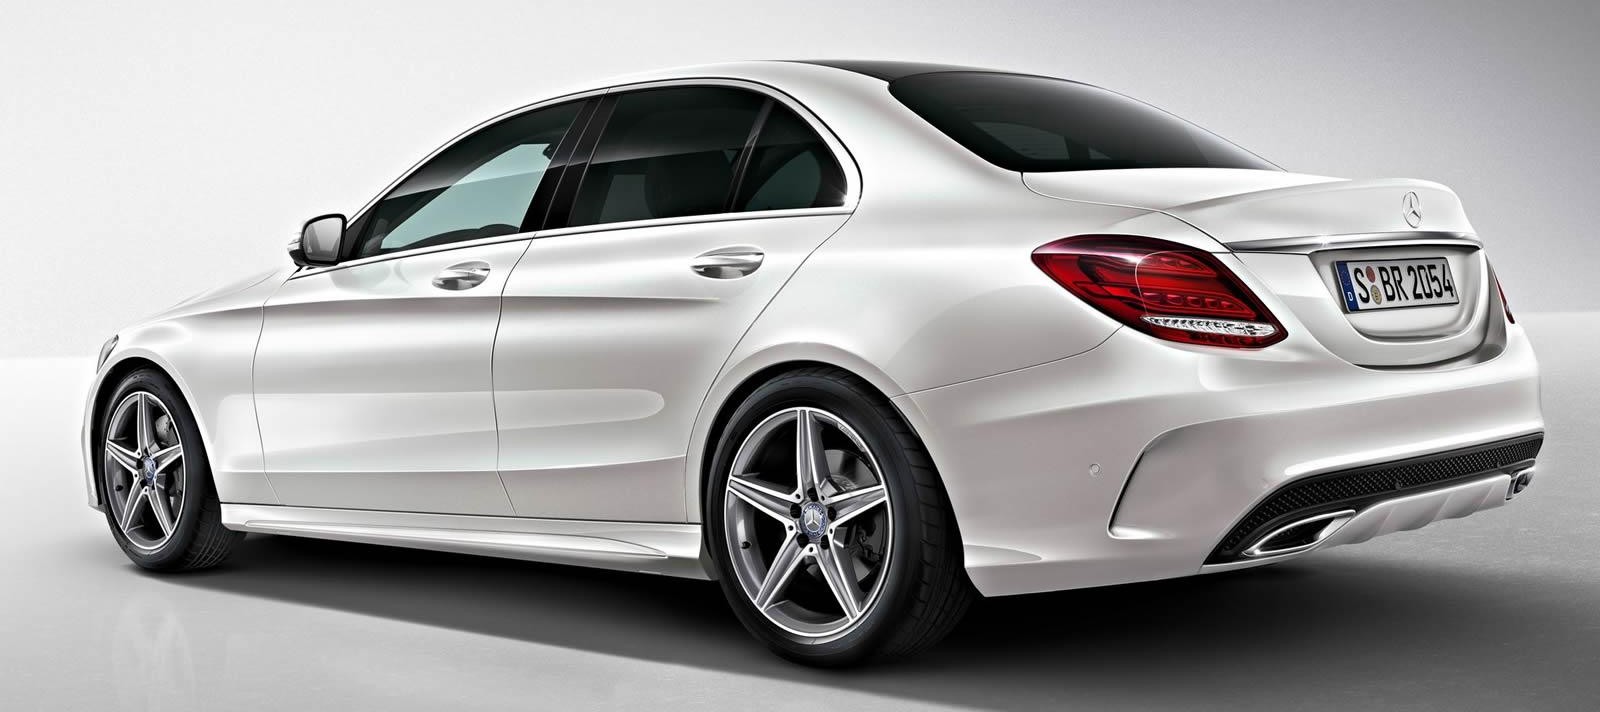 Mercedes Benz C Class 4th (W205) Generation Exterior Rear Side View